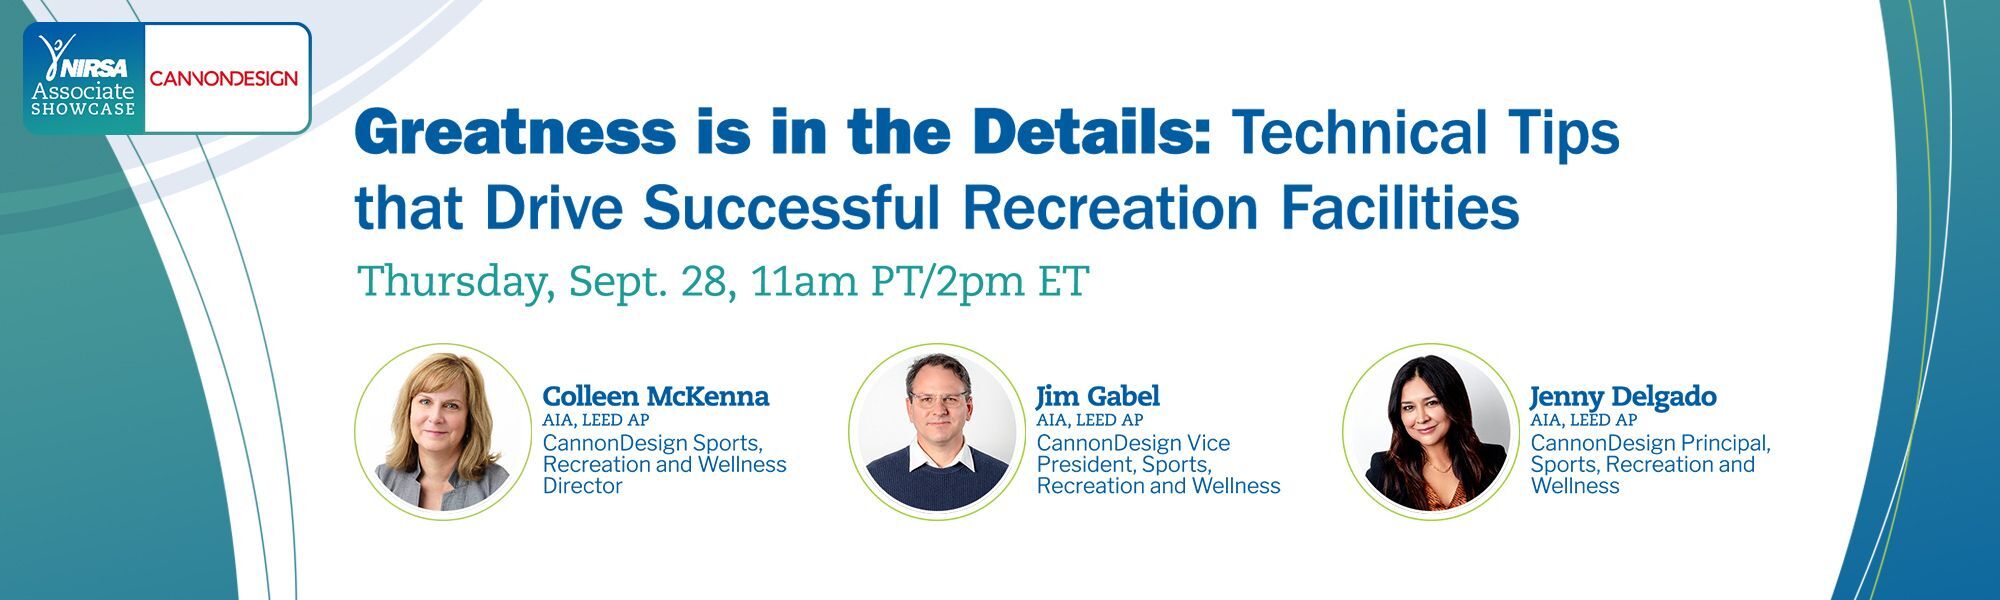 Greatness is in the Details: Technical Tips that Drive Successful Recreation Facilities